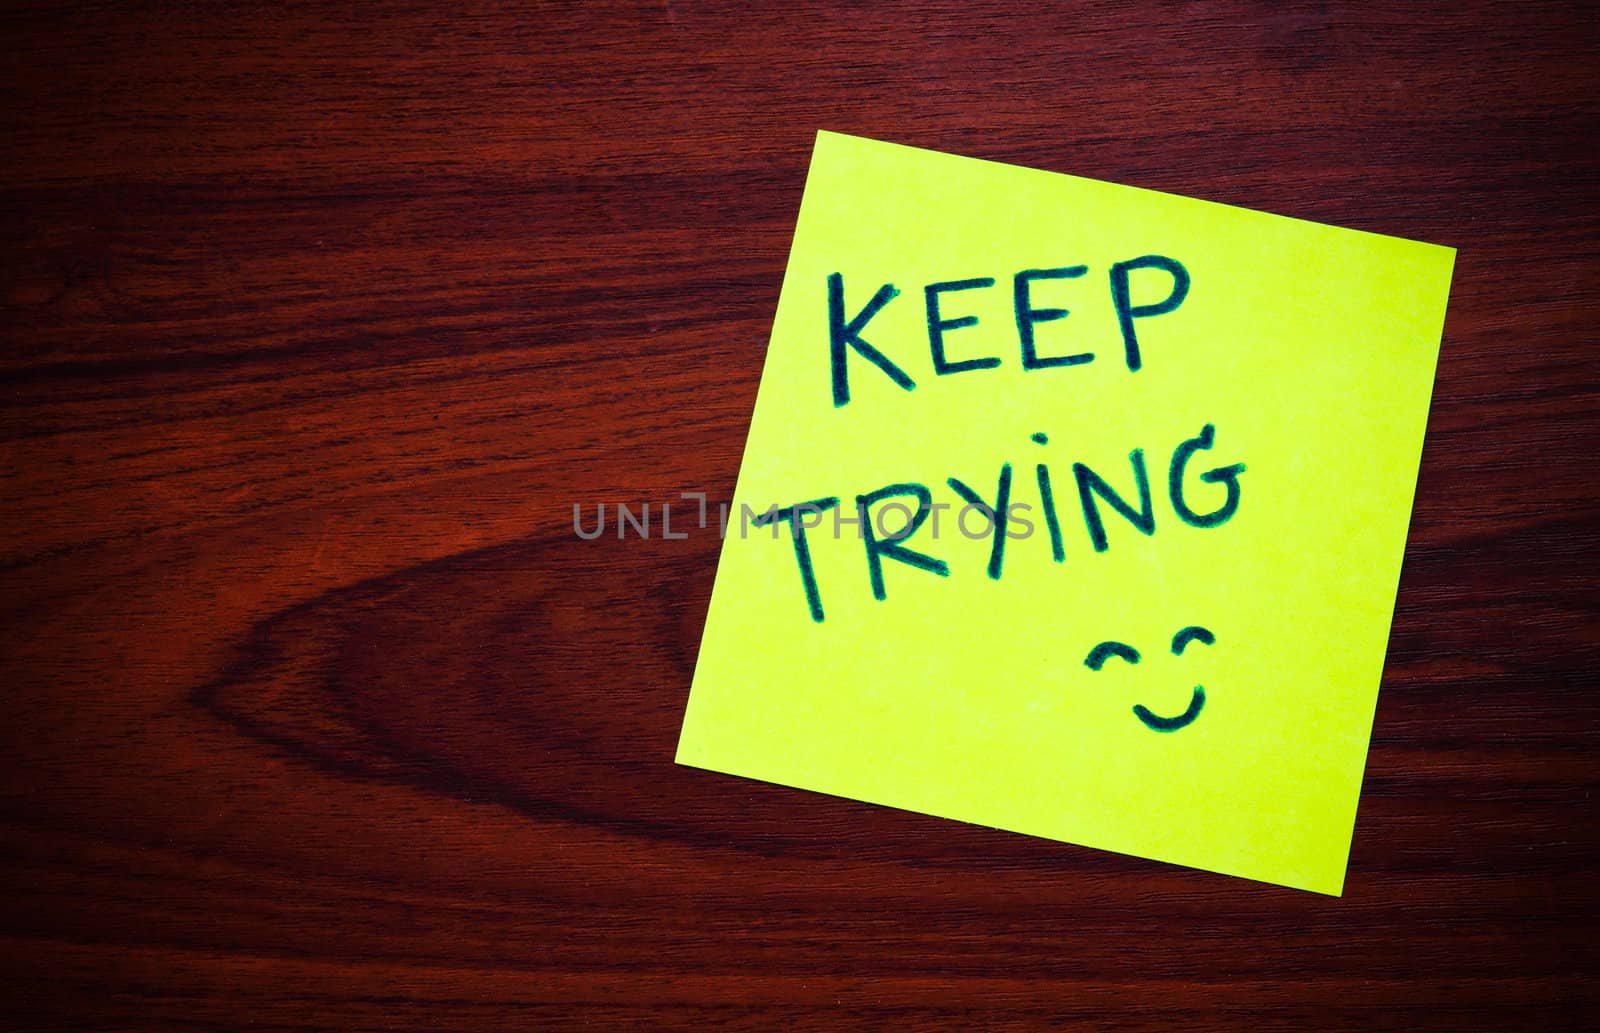 Keep trying on yellow sticky note against wood wall by nuchylee